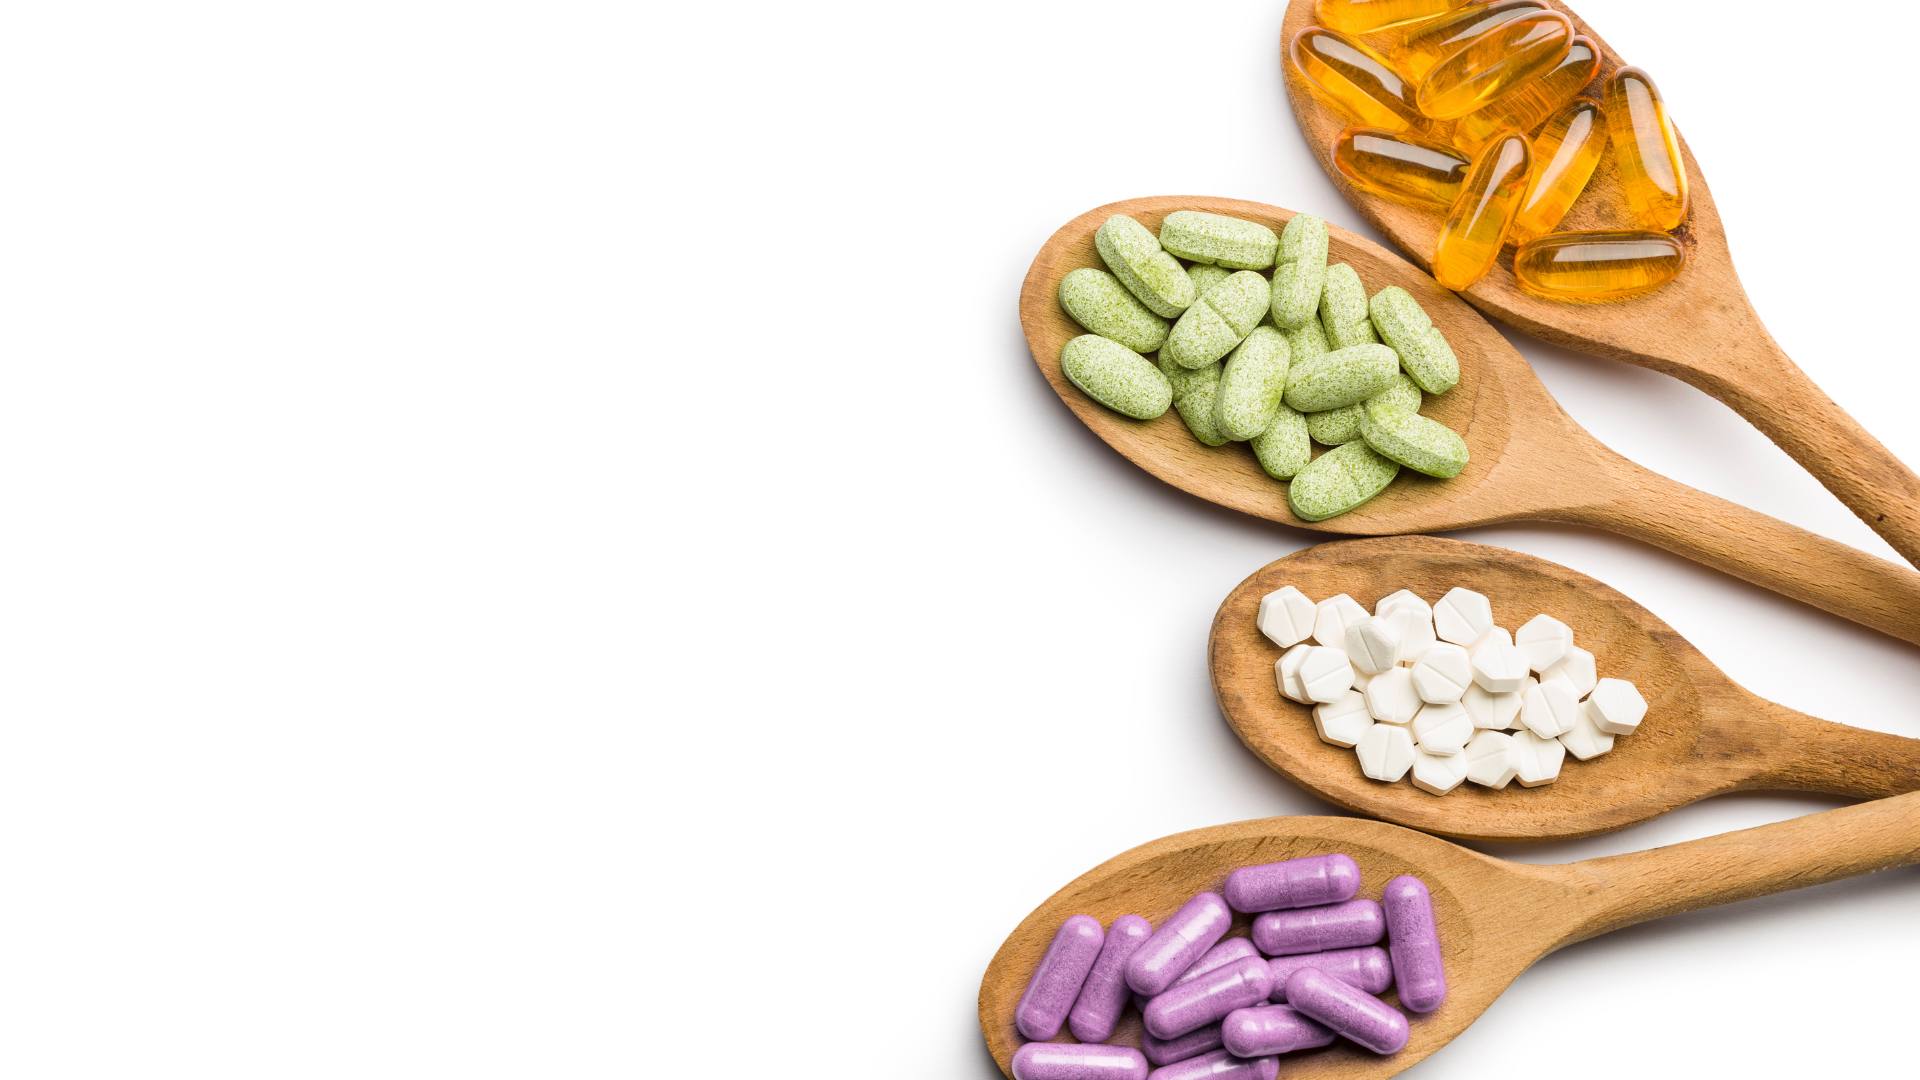 FAQ: What Natural Supplements Are Safe to Take?